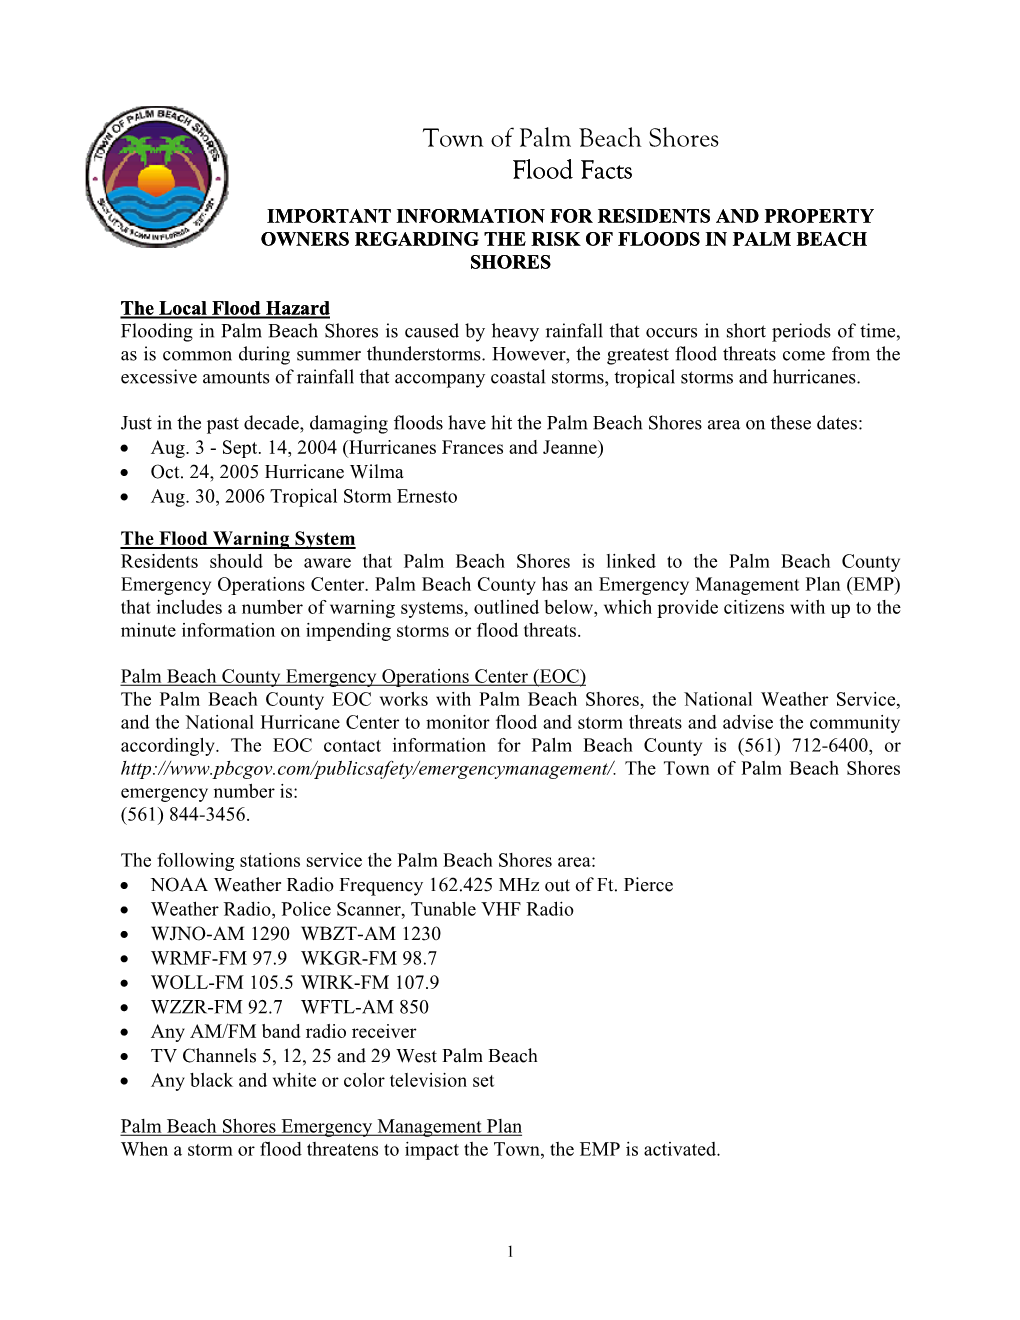 Download Palm Beach Shores Flood Facts